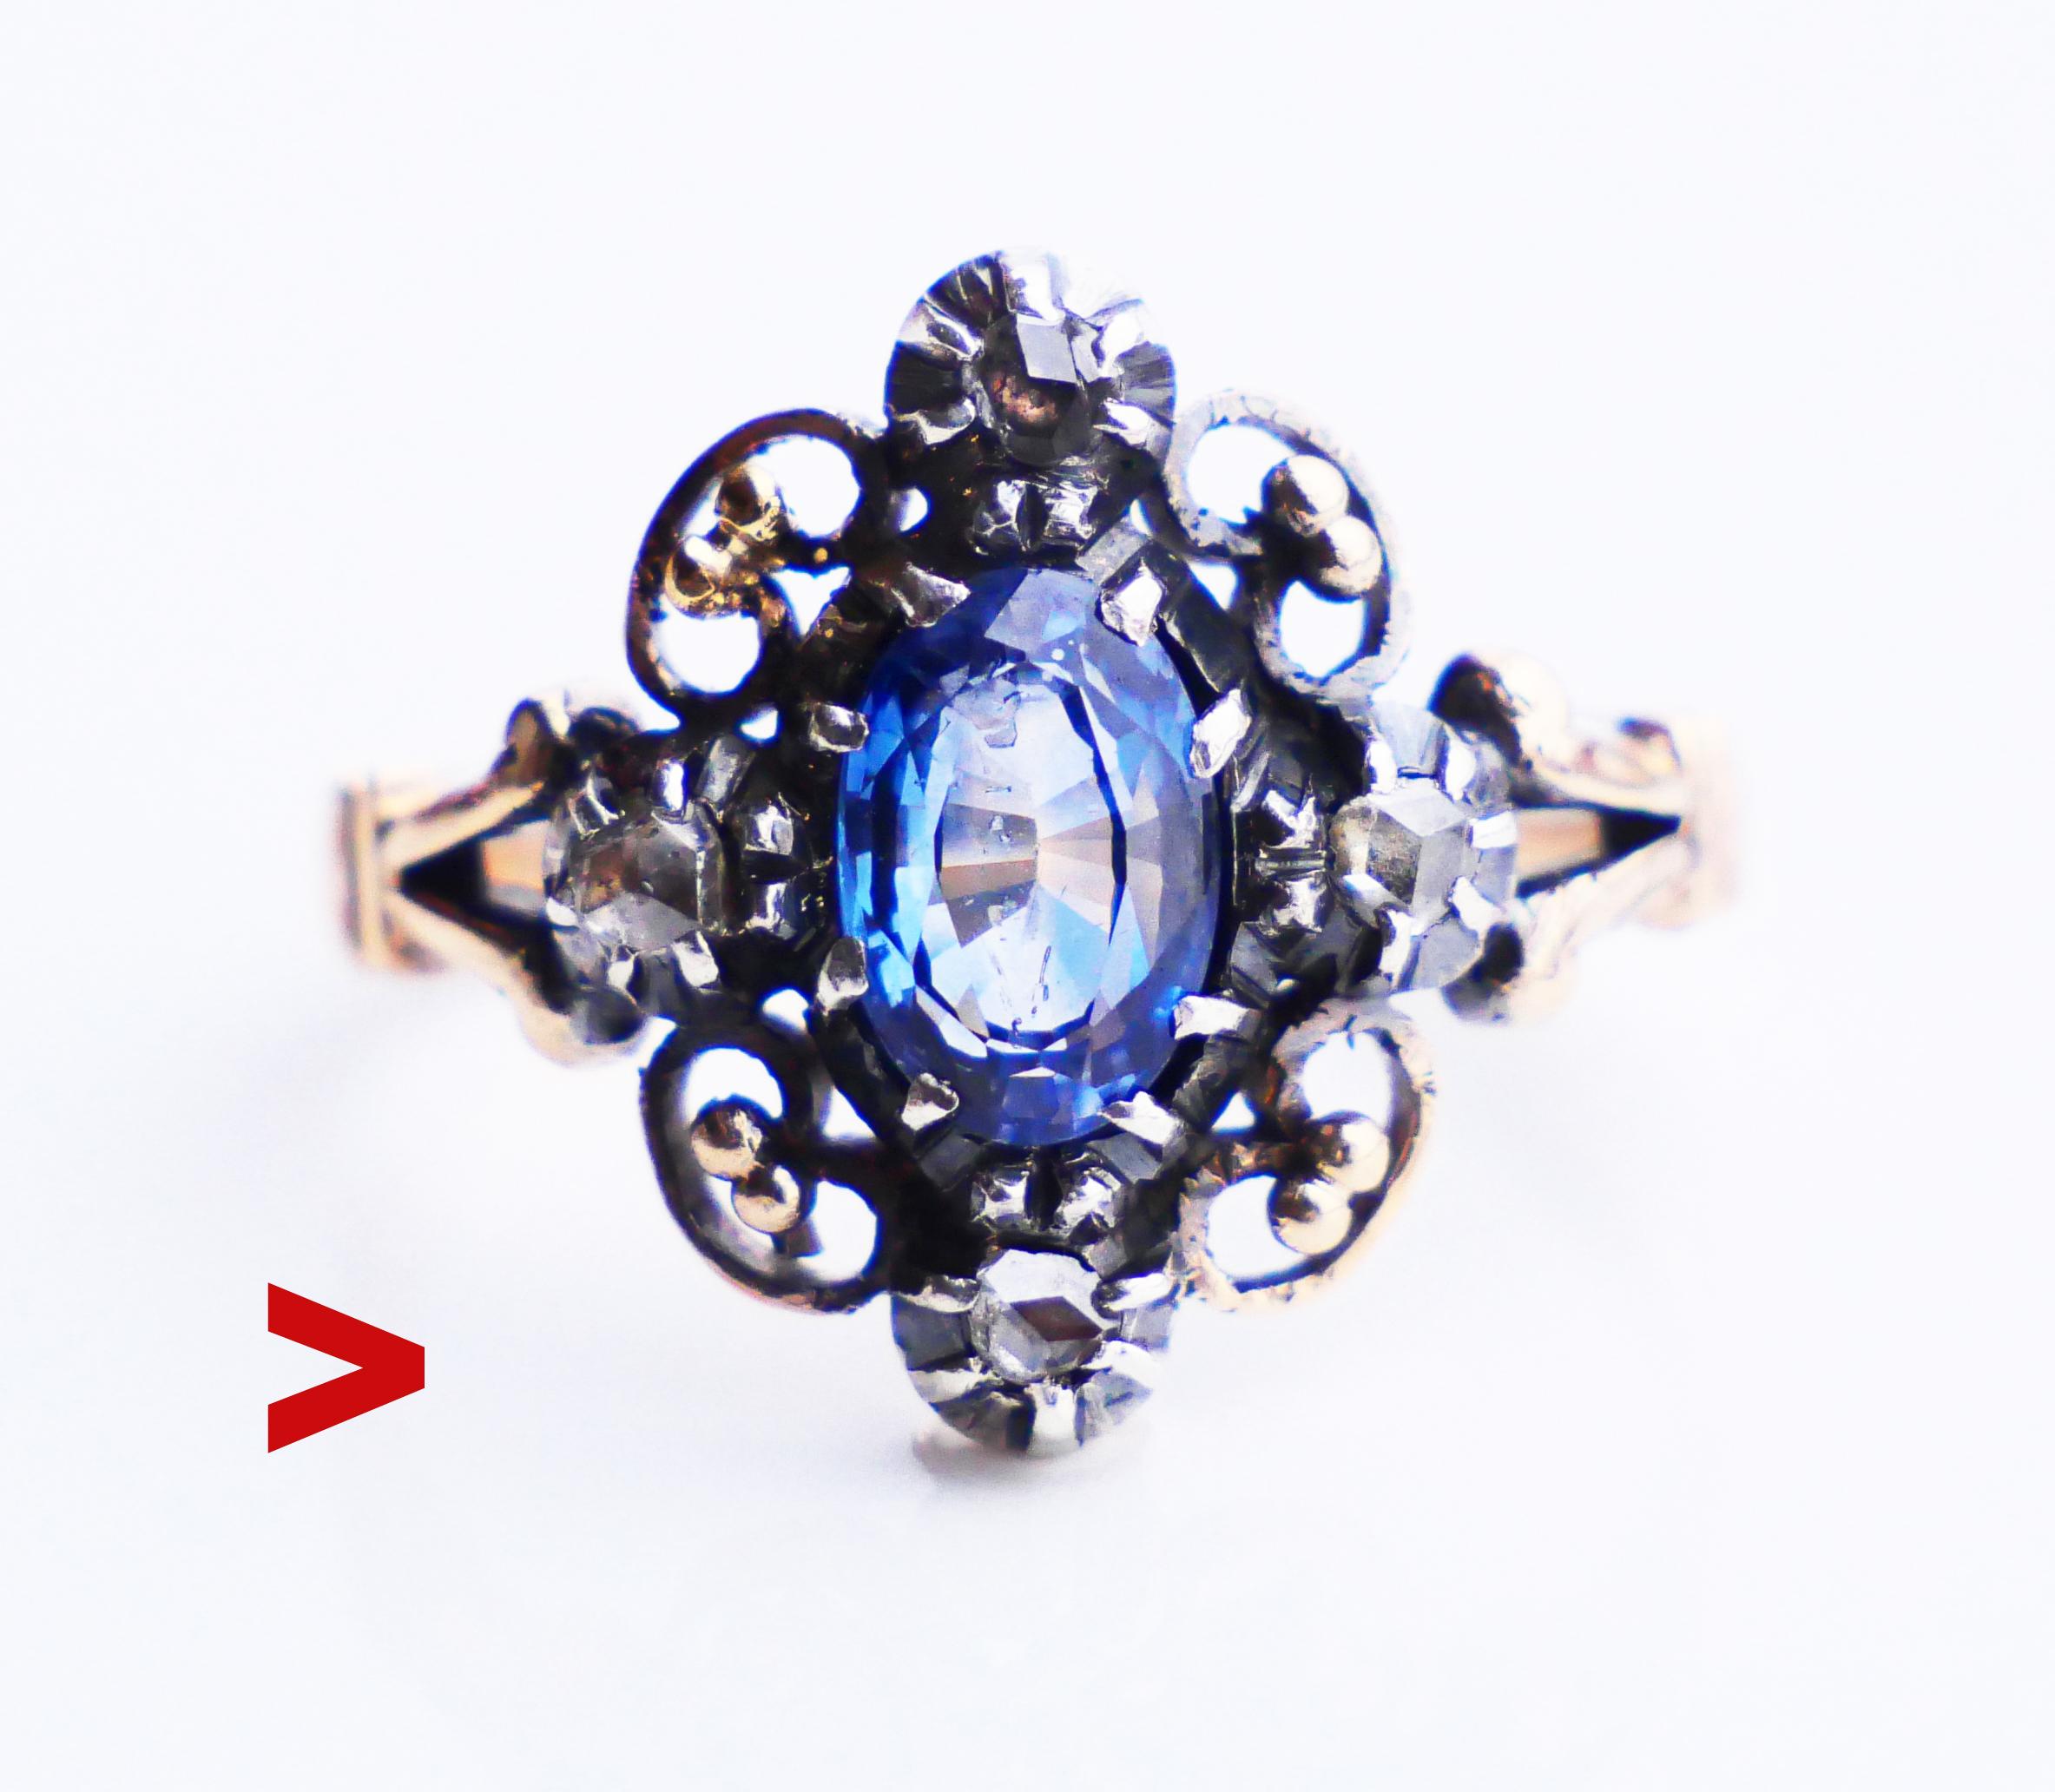 This Renaissance-styled ring has a flower-shaped composite Silver on an 18K Gold crown measuring 16 mm x 13 mm x 3.5 mm. The central stone is oval cut natural Ceylon Sapphire of Light - Blue color /Cornflower variety 8.25 mm x 5.6 mm x 3.3 mm deep /